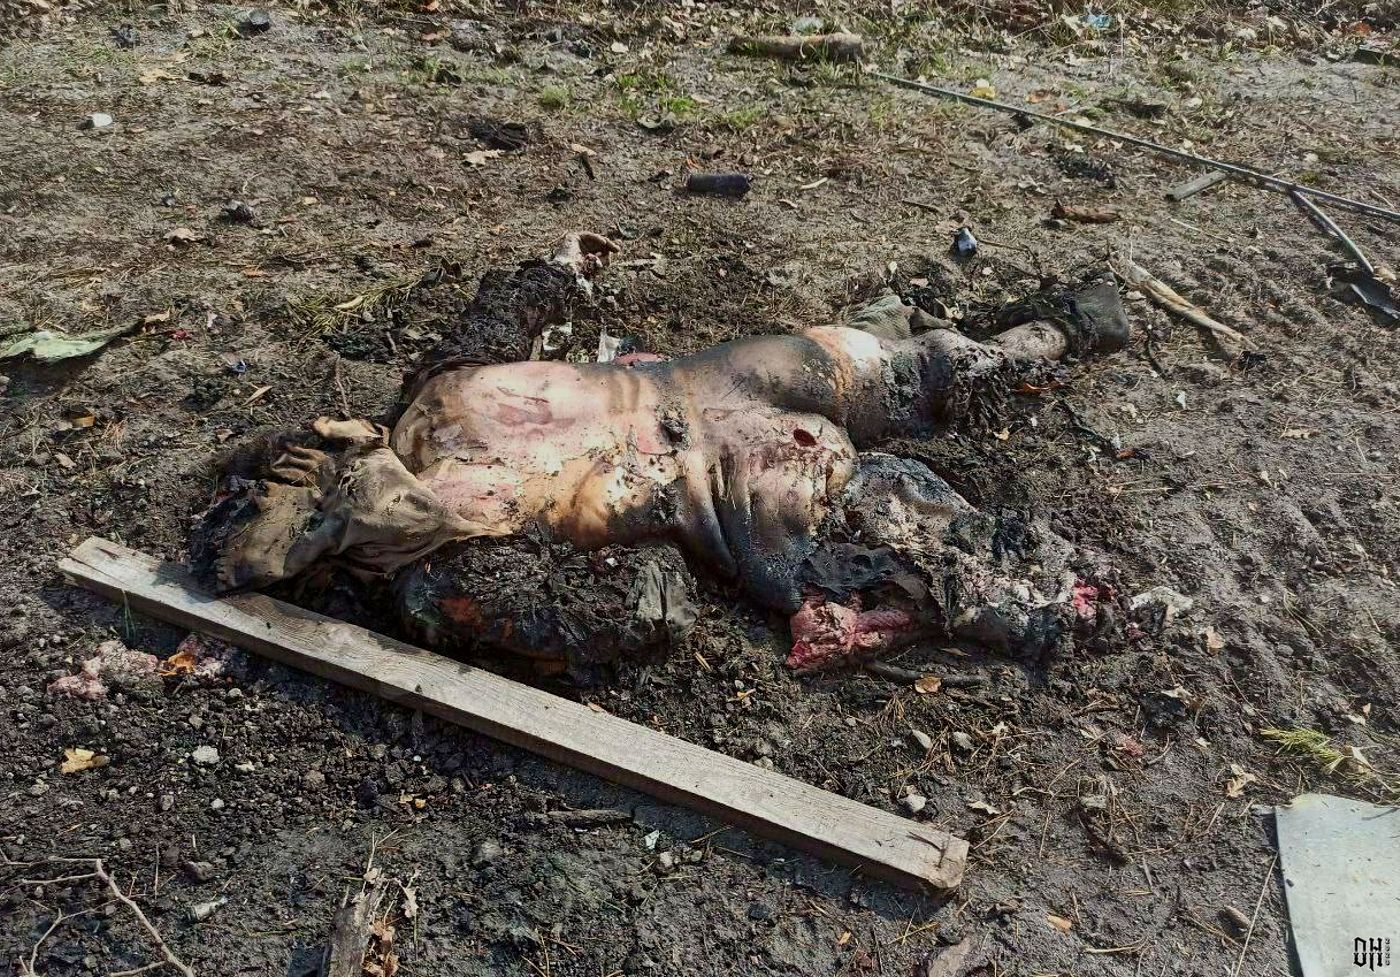 DH - Sldiers' Horror Faces and Bodies of Russia-Ukraine Conflict 40.jpg